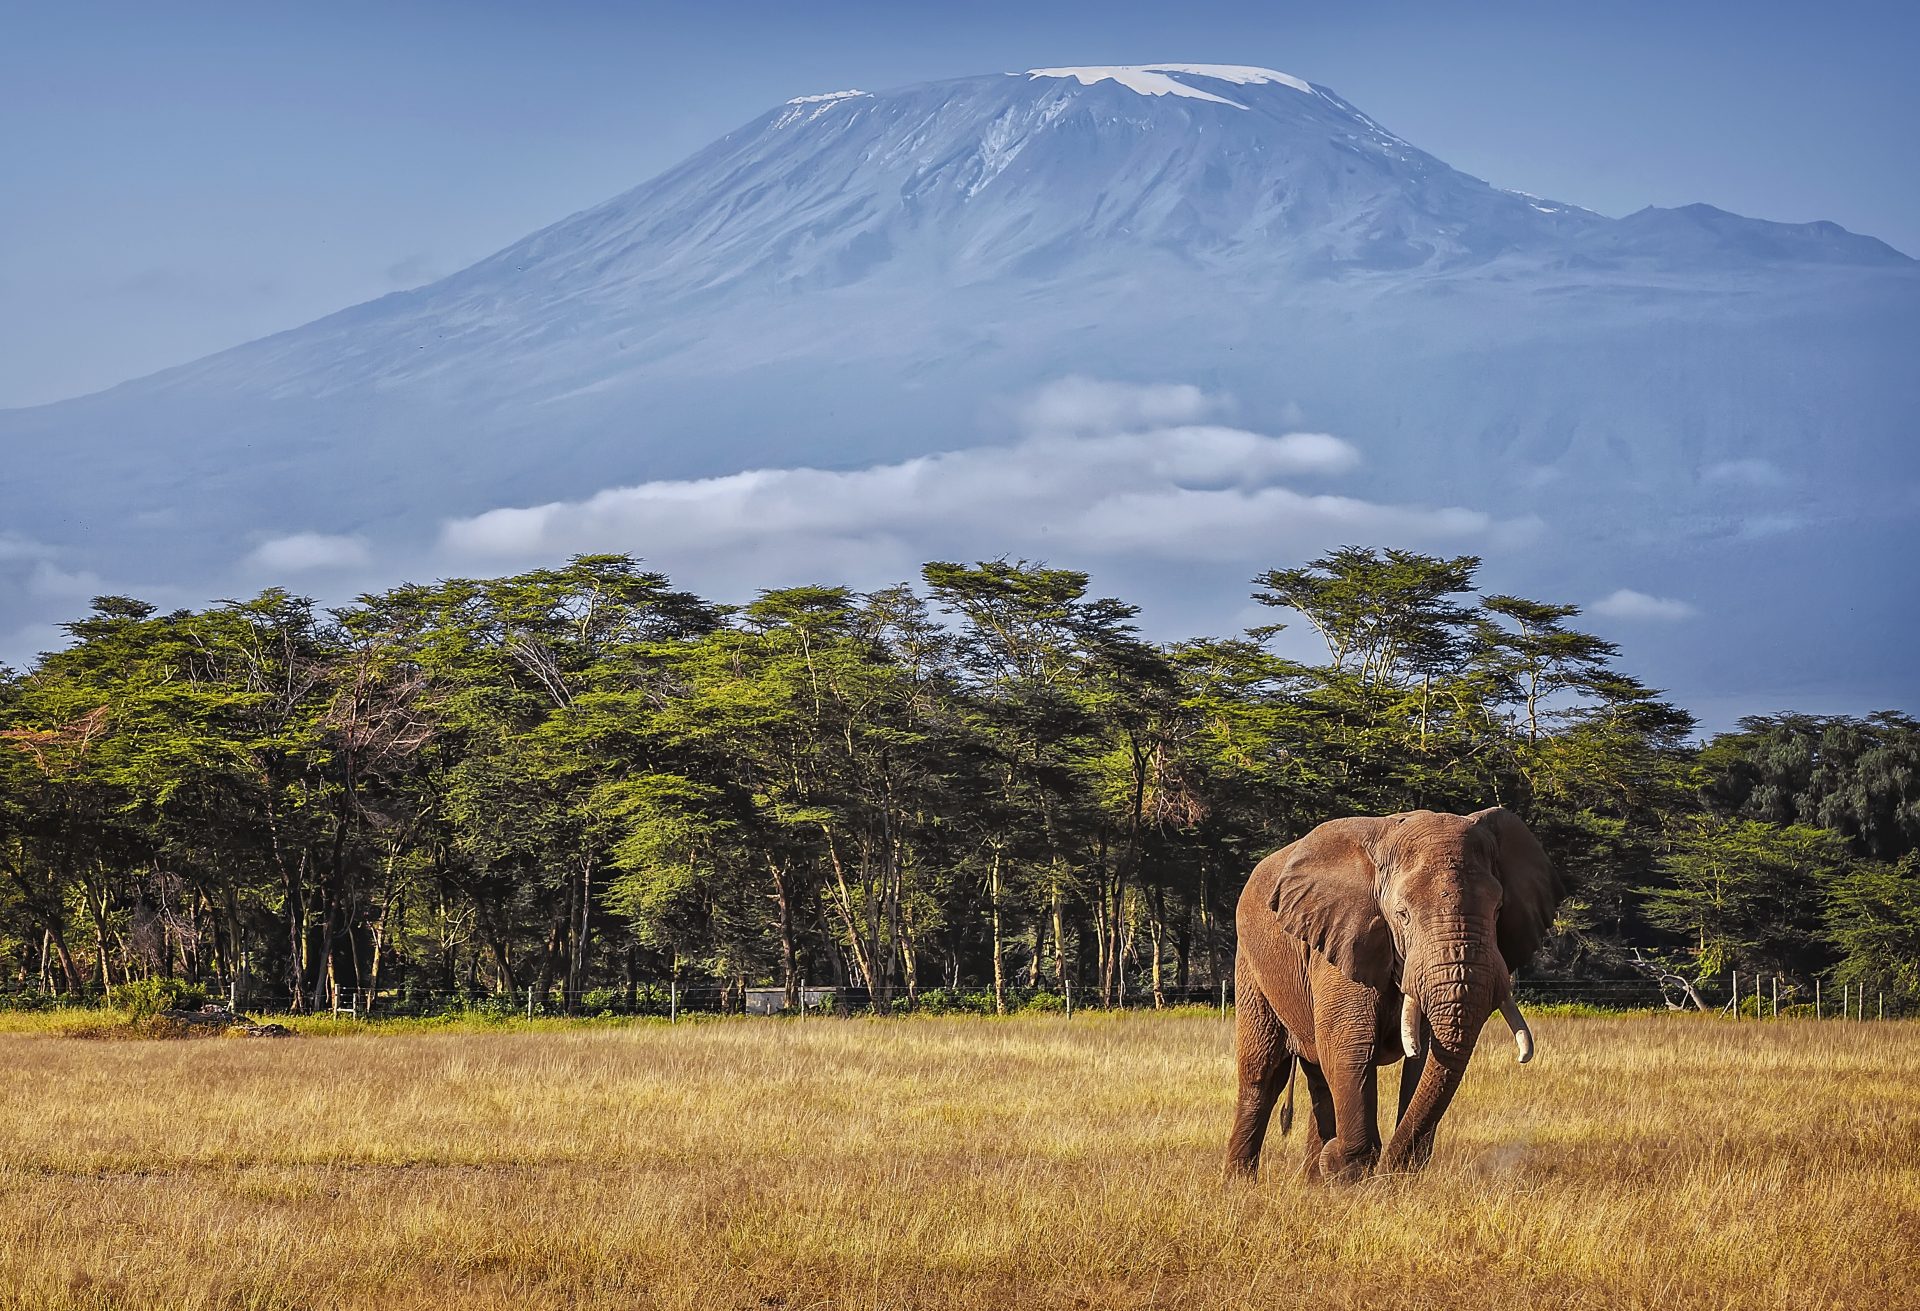 Kilimanjaro Preparation Guide: 10 Must-Haves for a Comfortable Hiking Trip